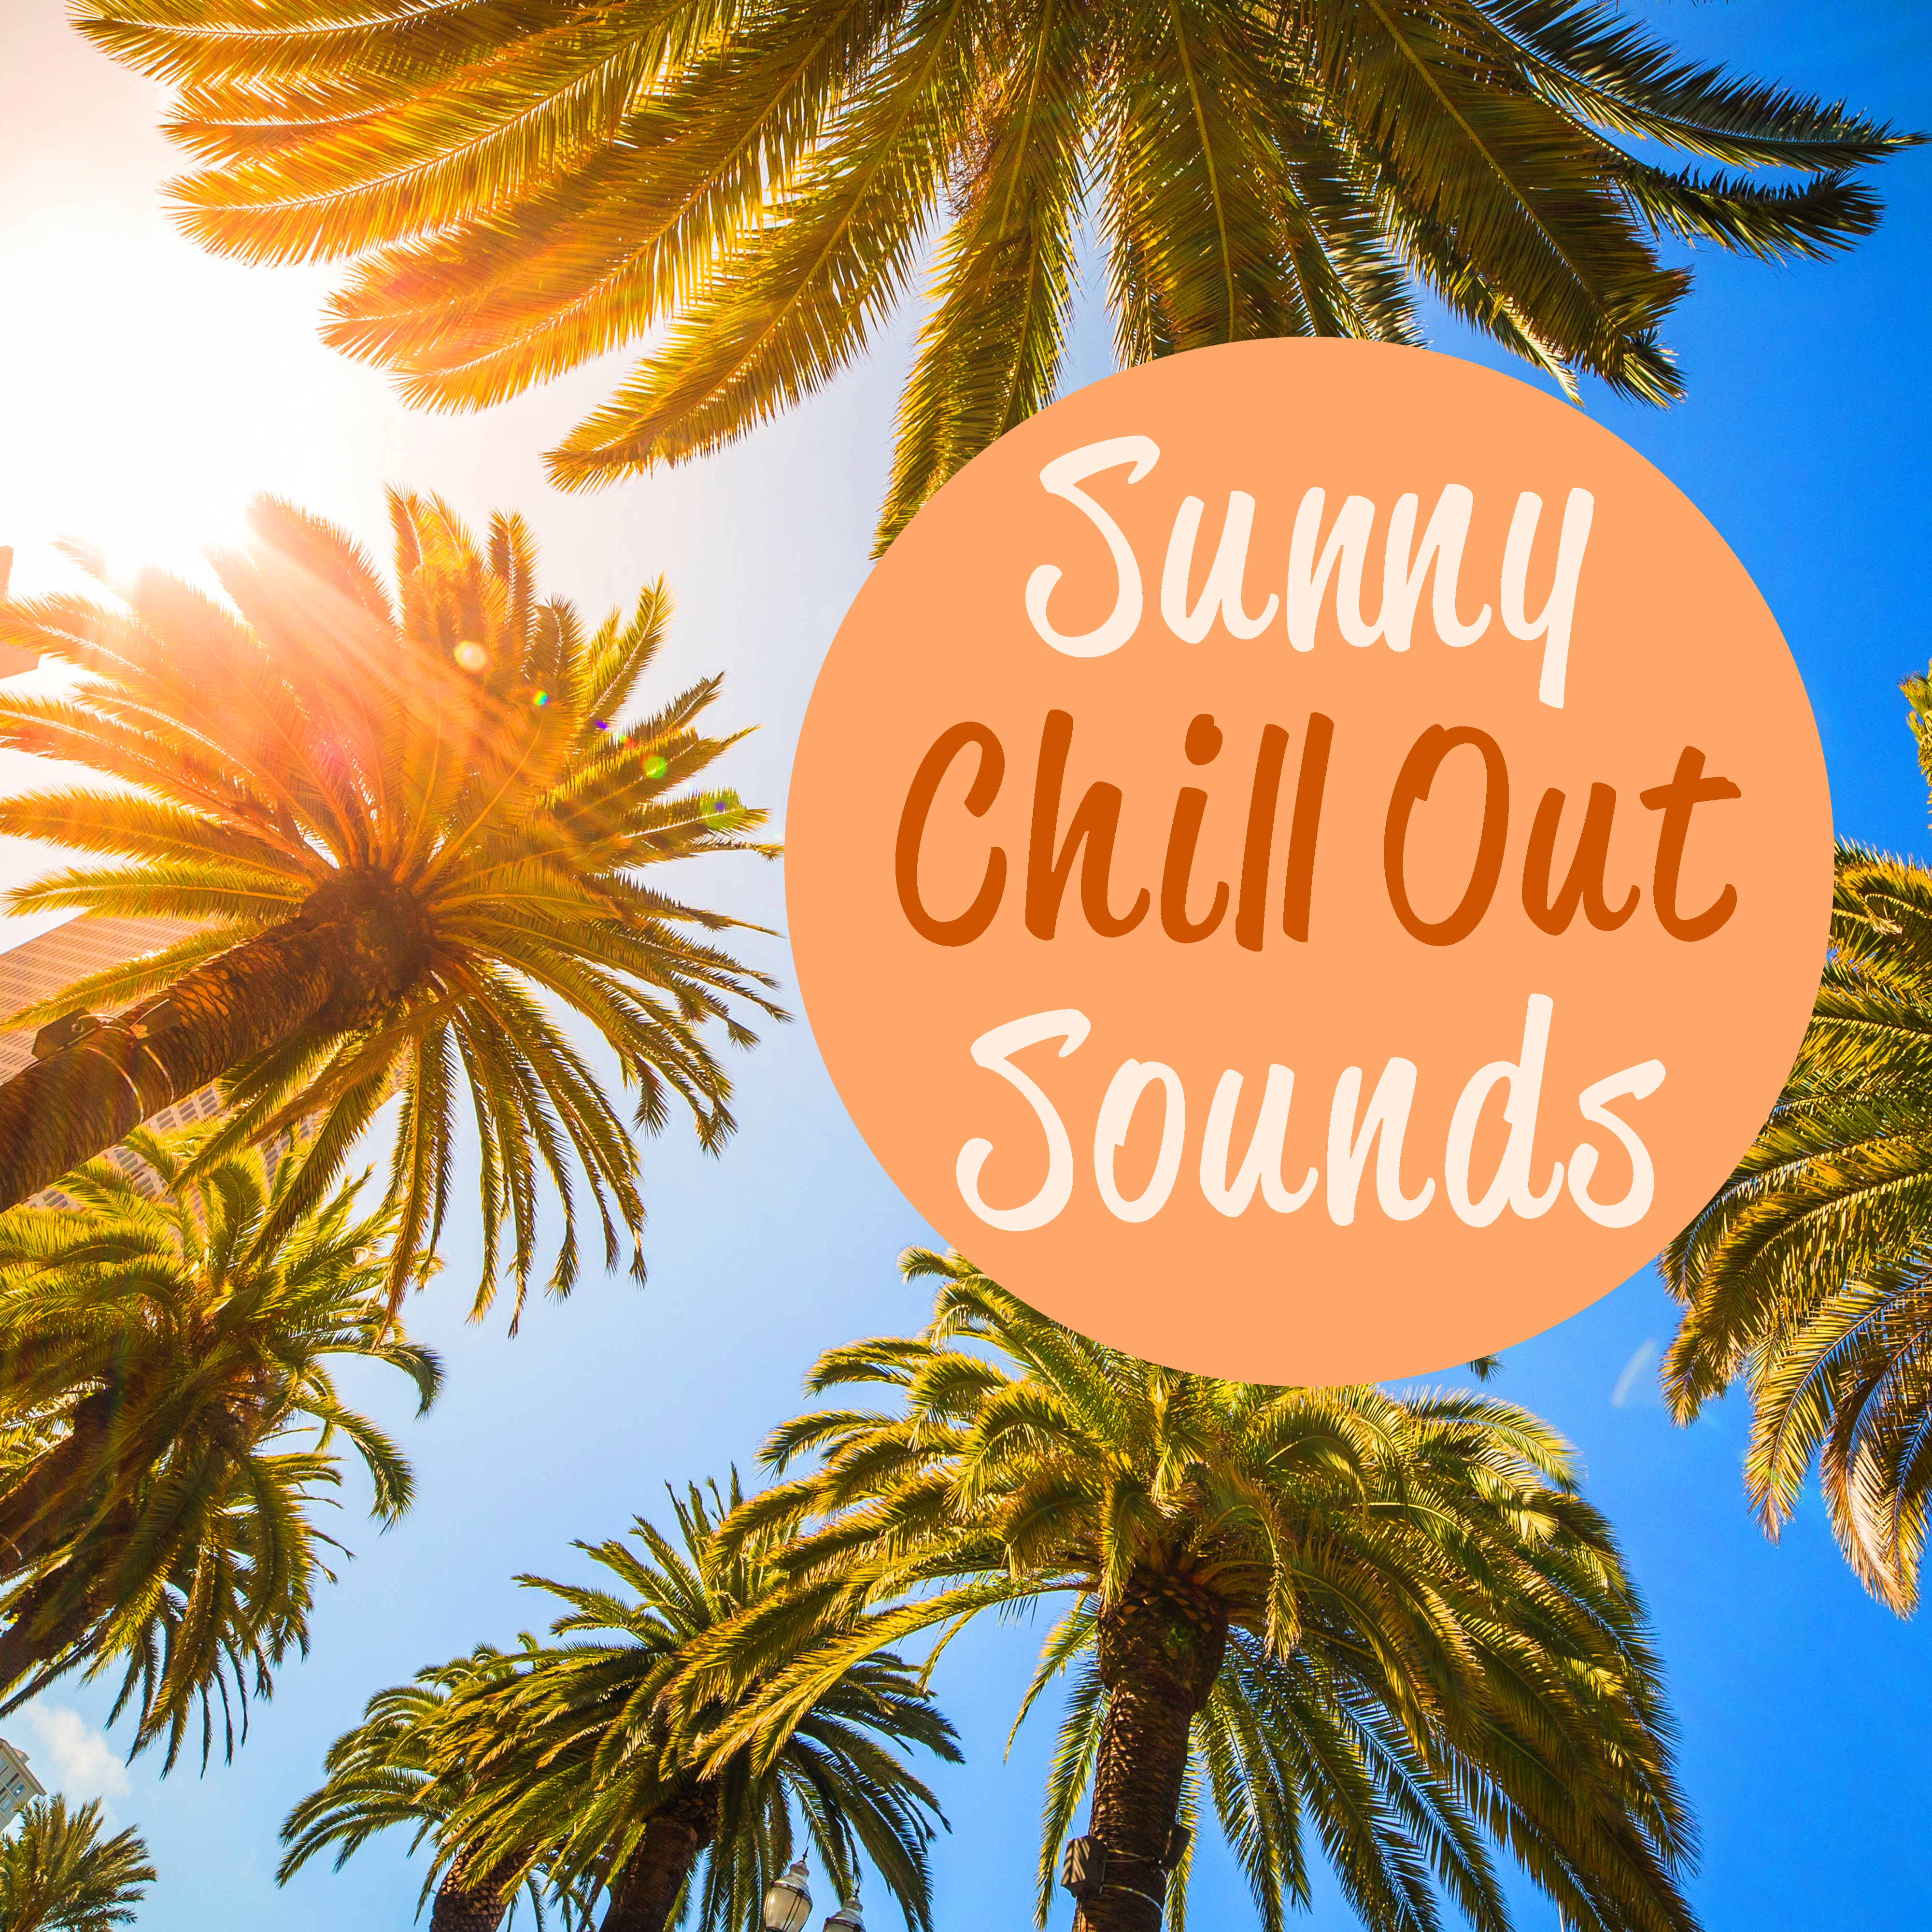 Sunny Chill Out Sounds – Calming Waves, Summer Rest, Sunny Chill Out, Relaxing Melodies